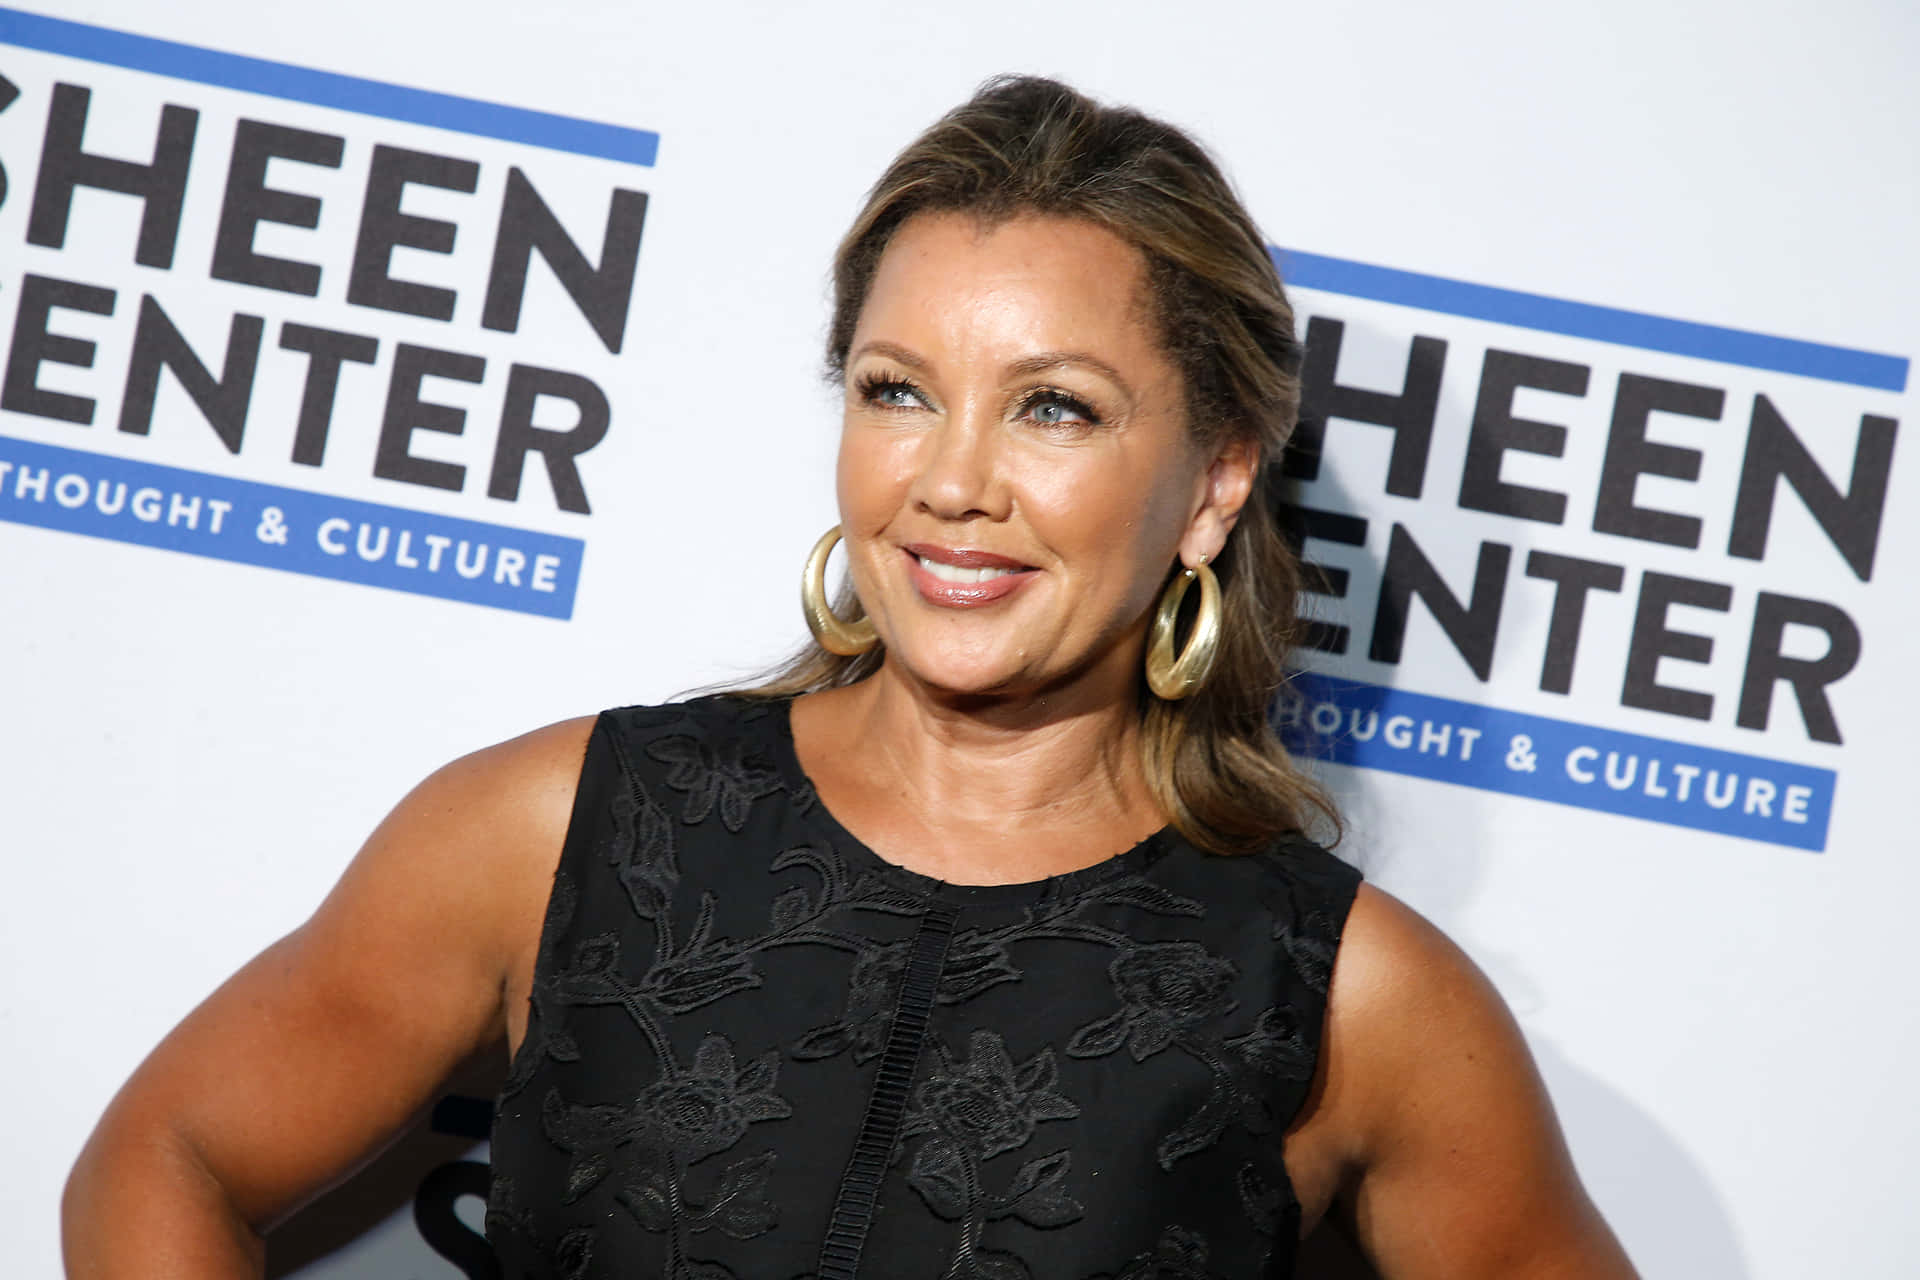 Vanessa Williams looking gorgeous in a long dress